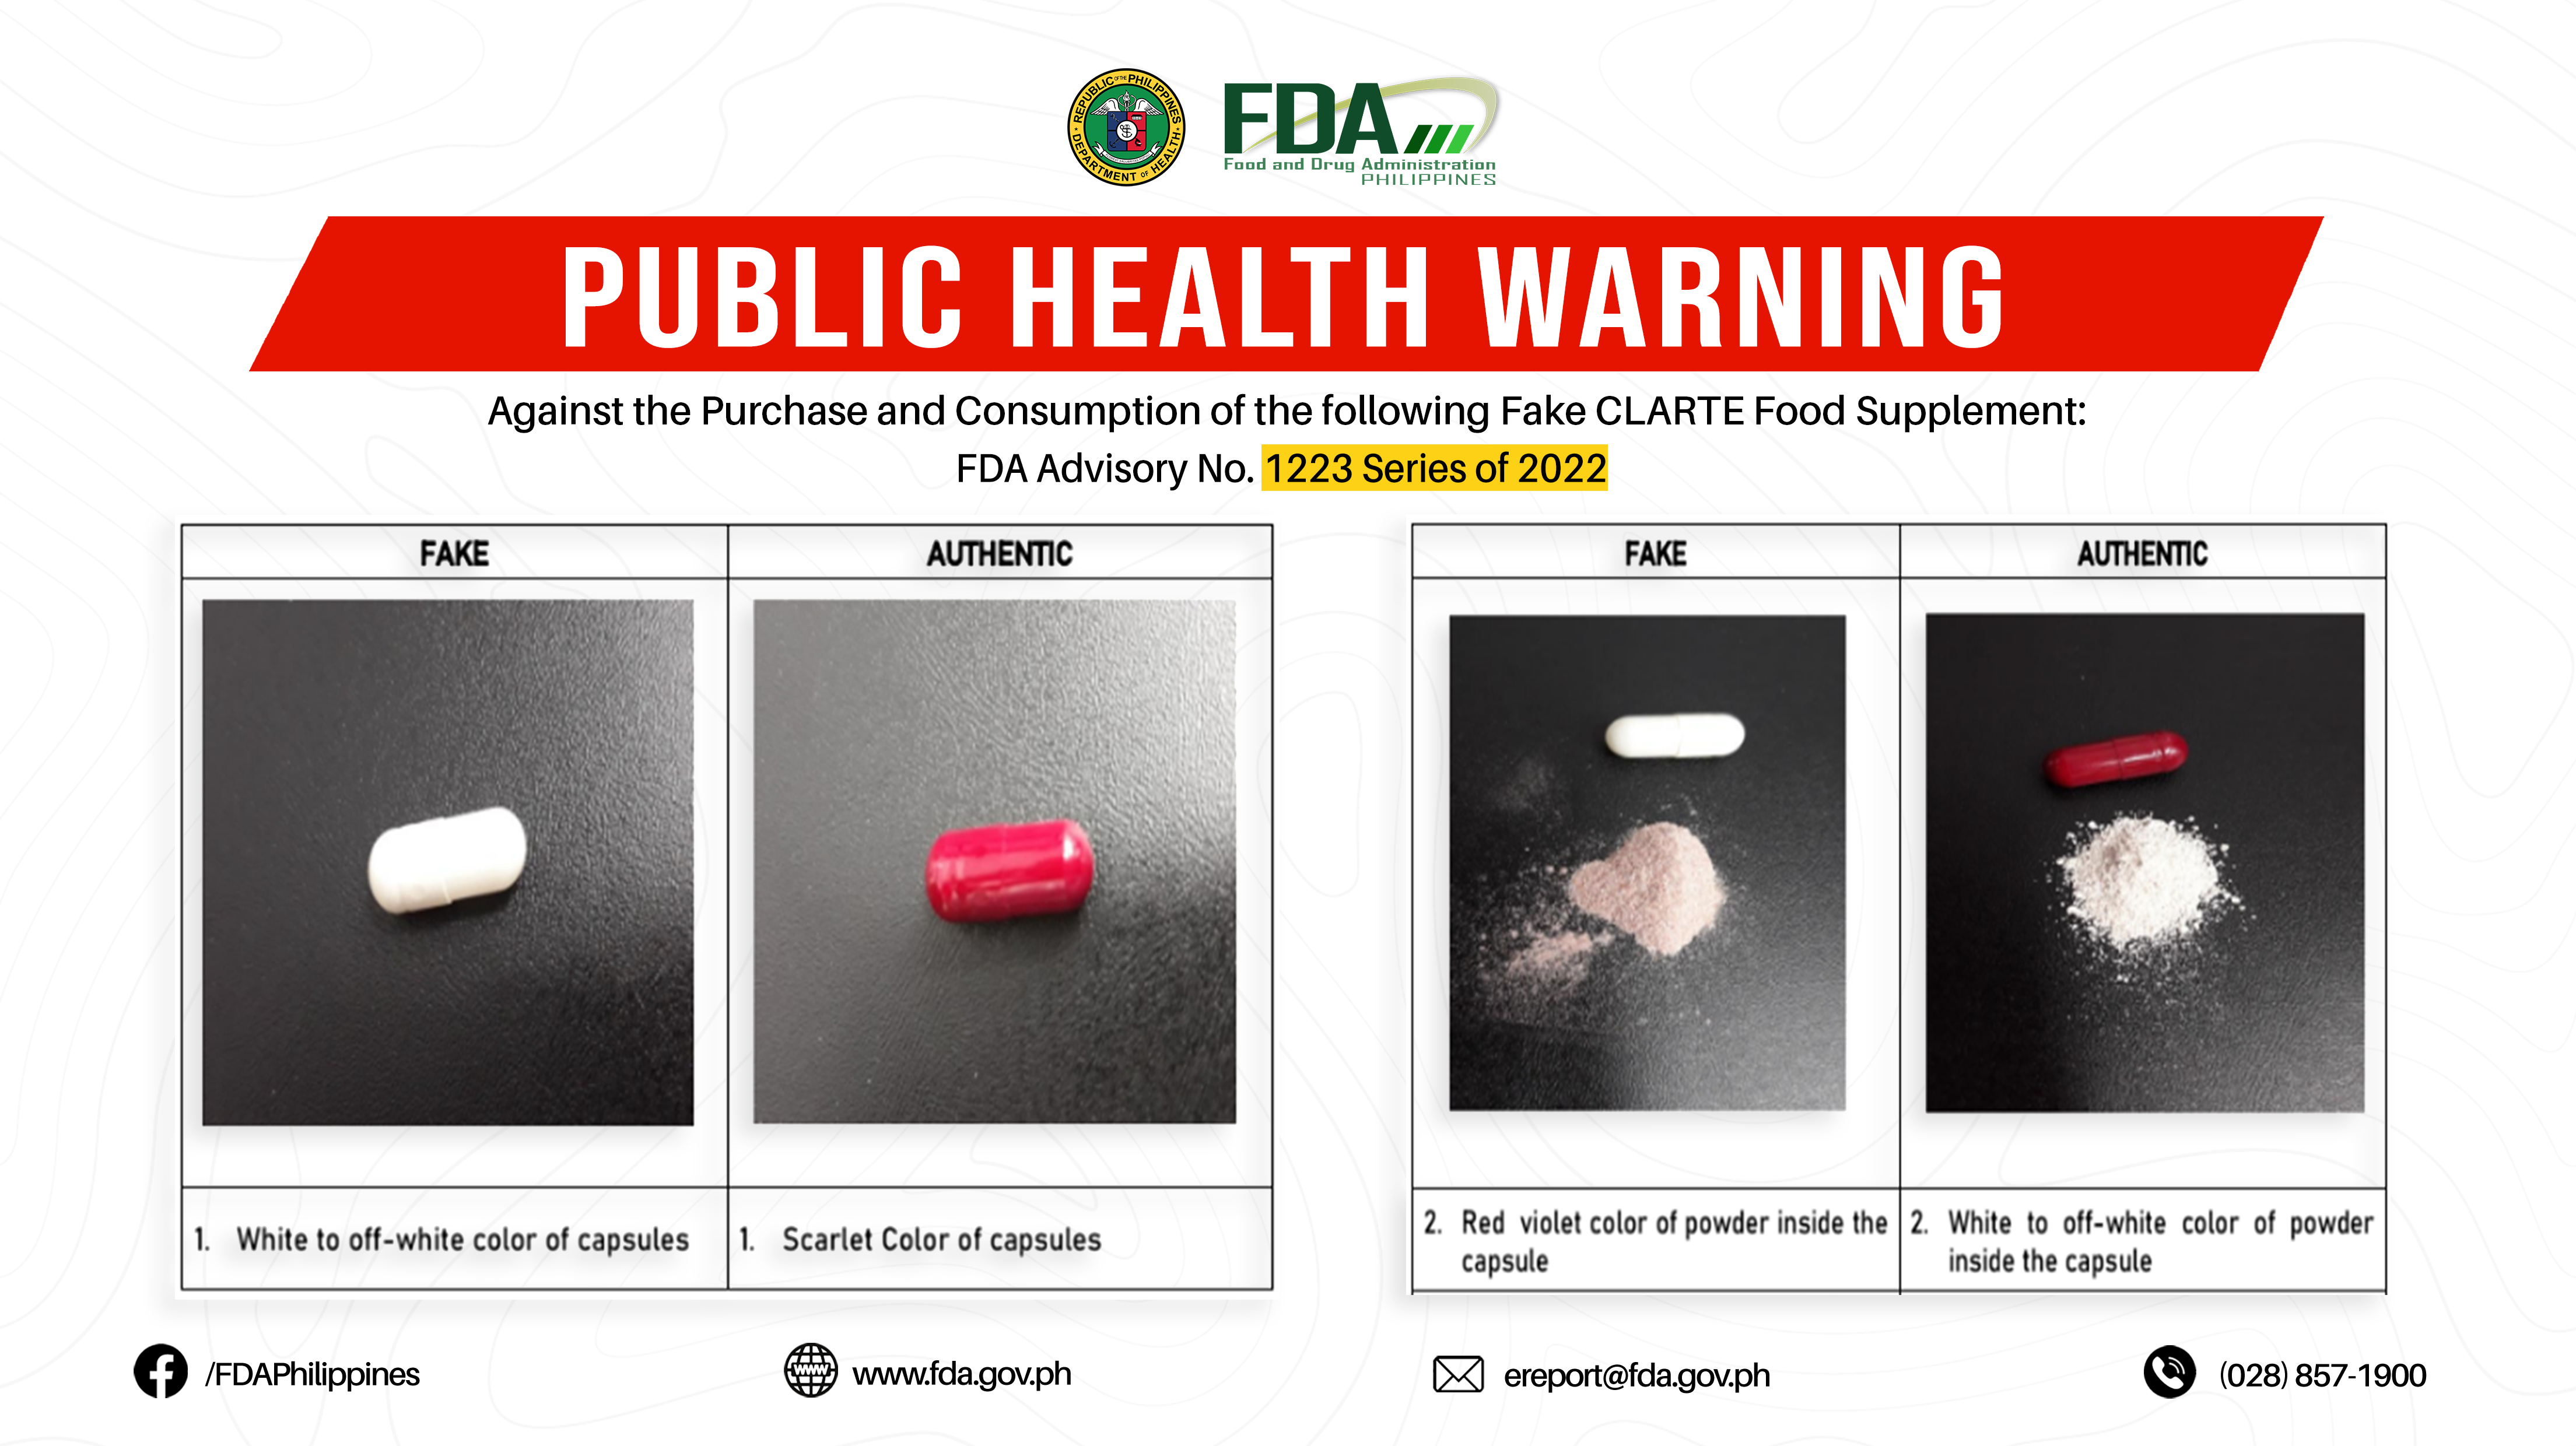 FDA Advisory No.2022-1223 || Public Health Warning Against the Purchase and Consumption of the following Fake CLARTE Food Supplement: